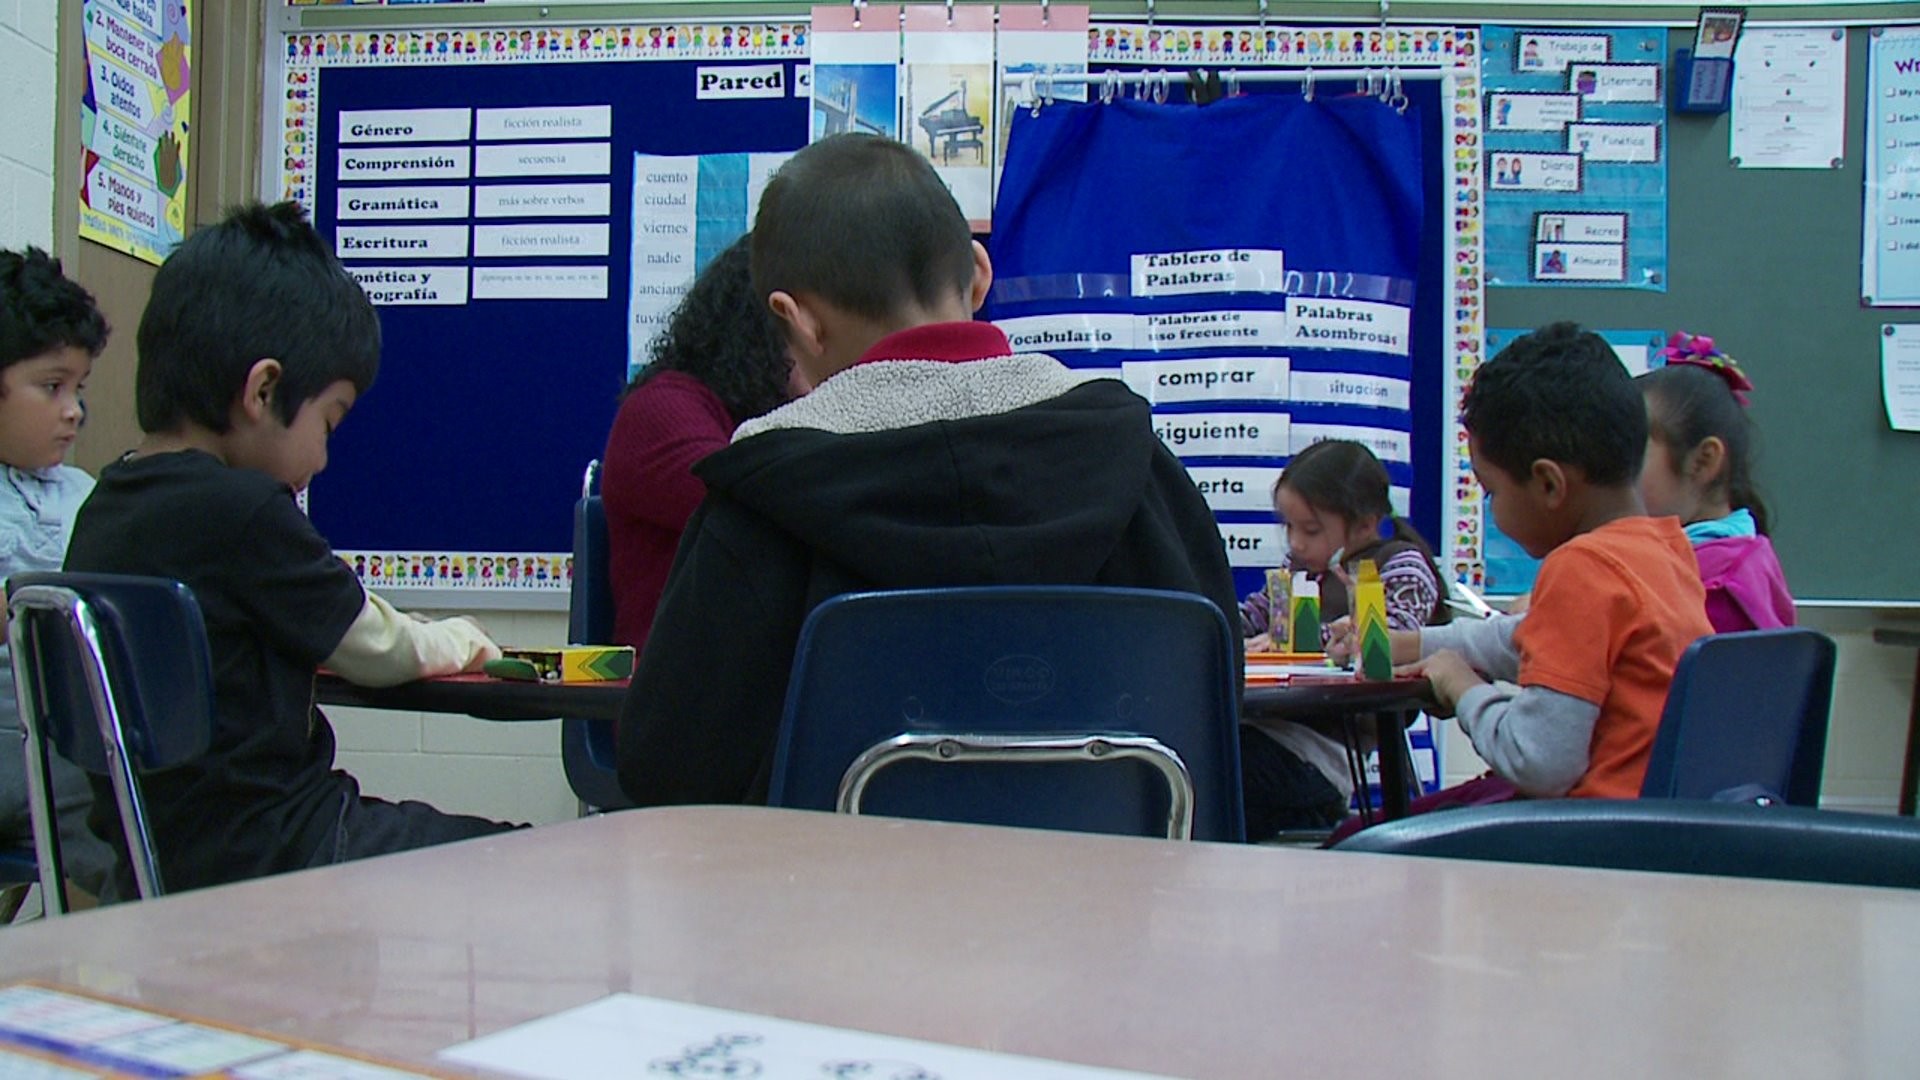 30 different languages taxing for diverse East Moline schools wqad com